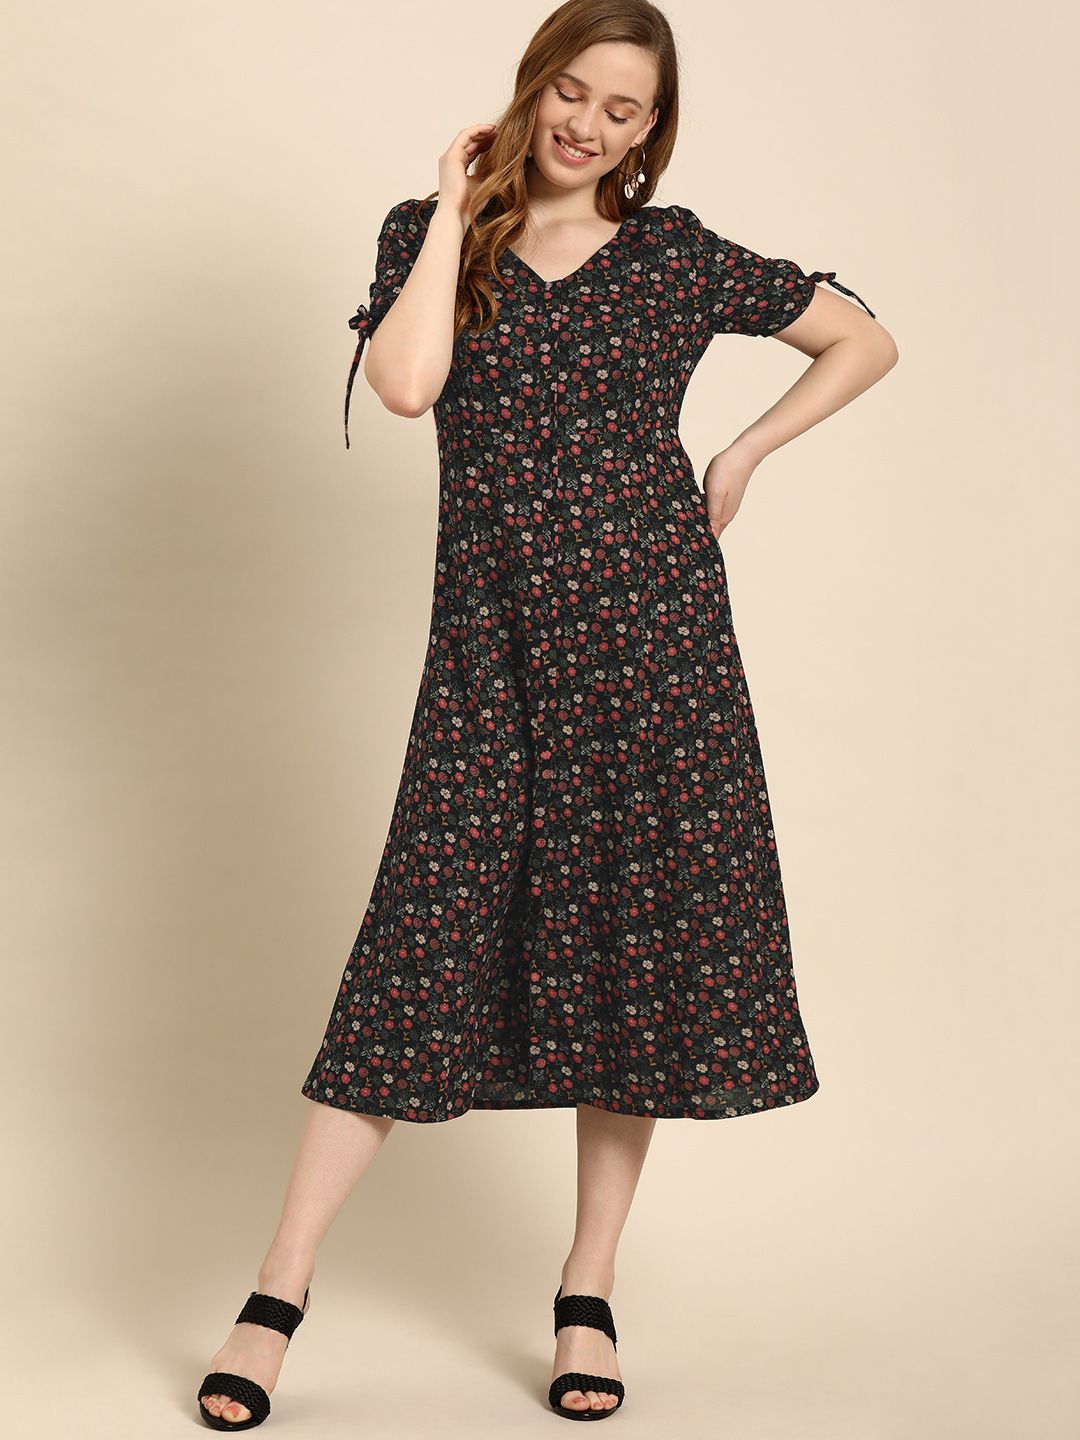 DressBerry Black Floral Printed A-Line Dress Price in India